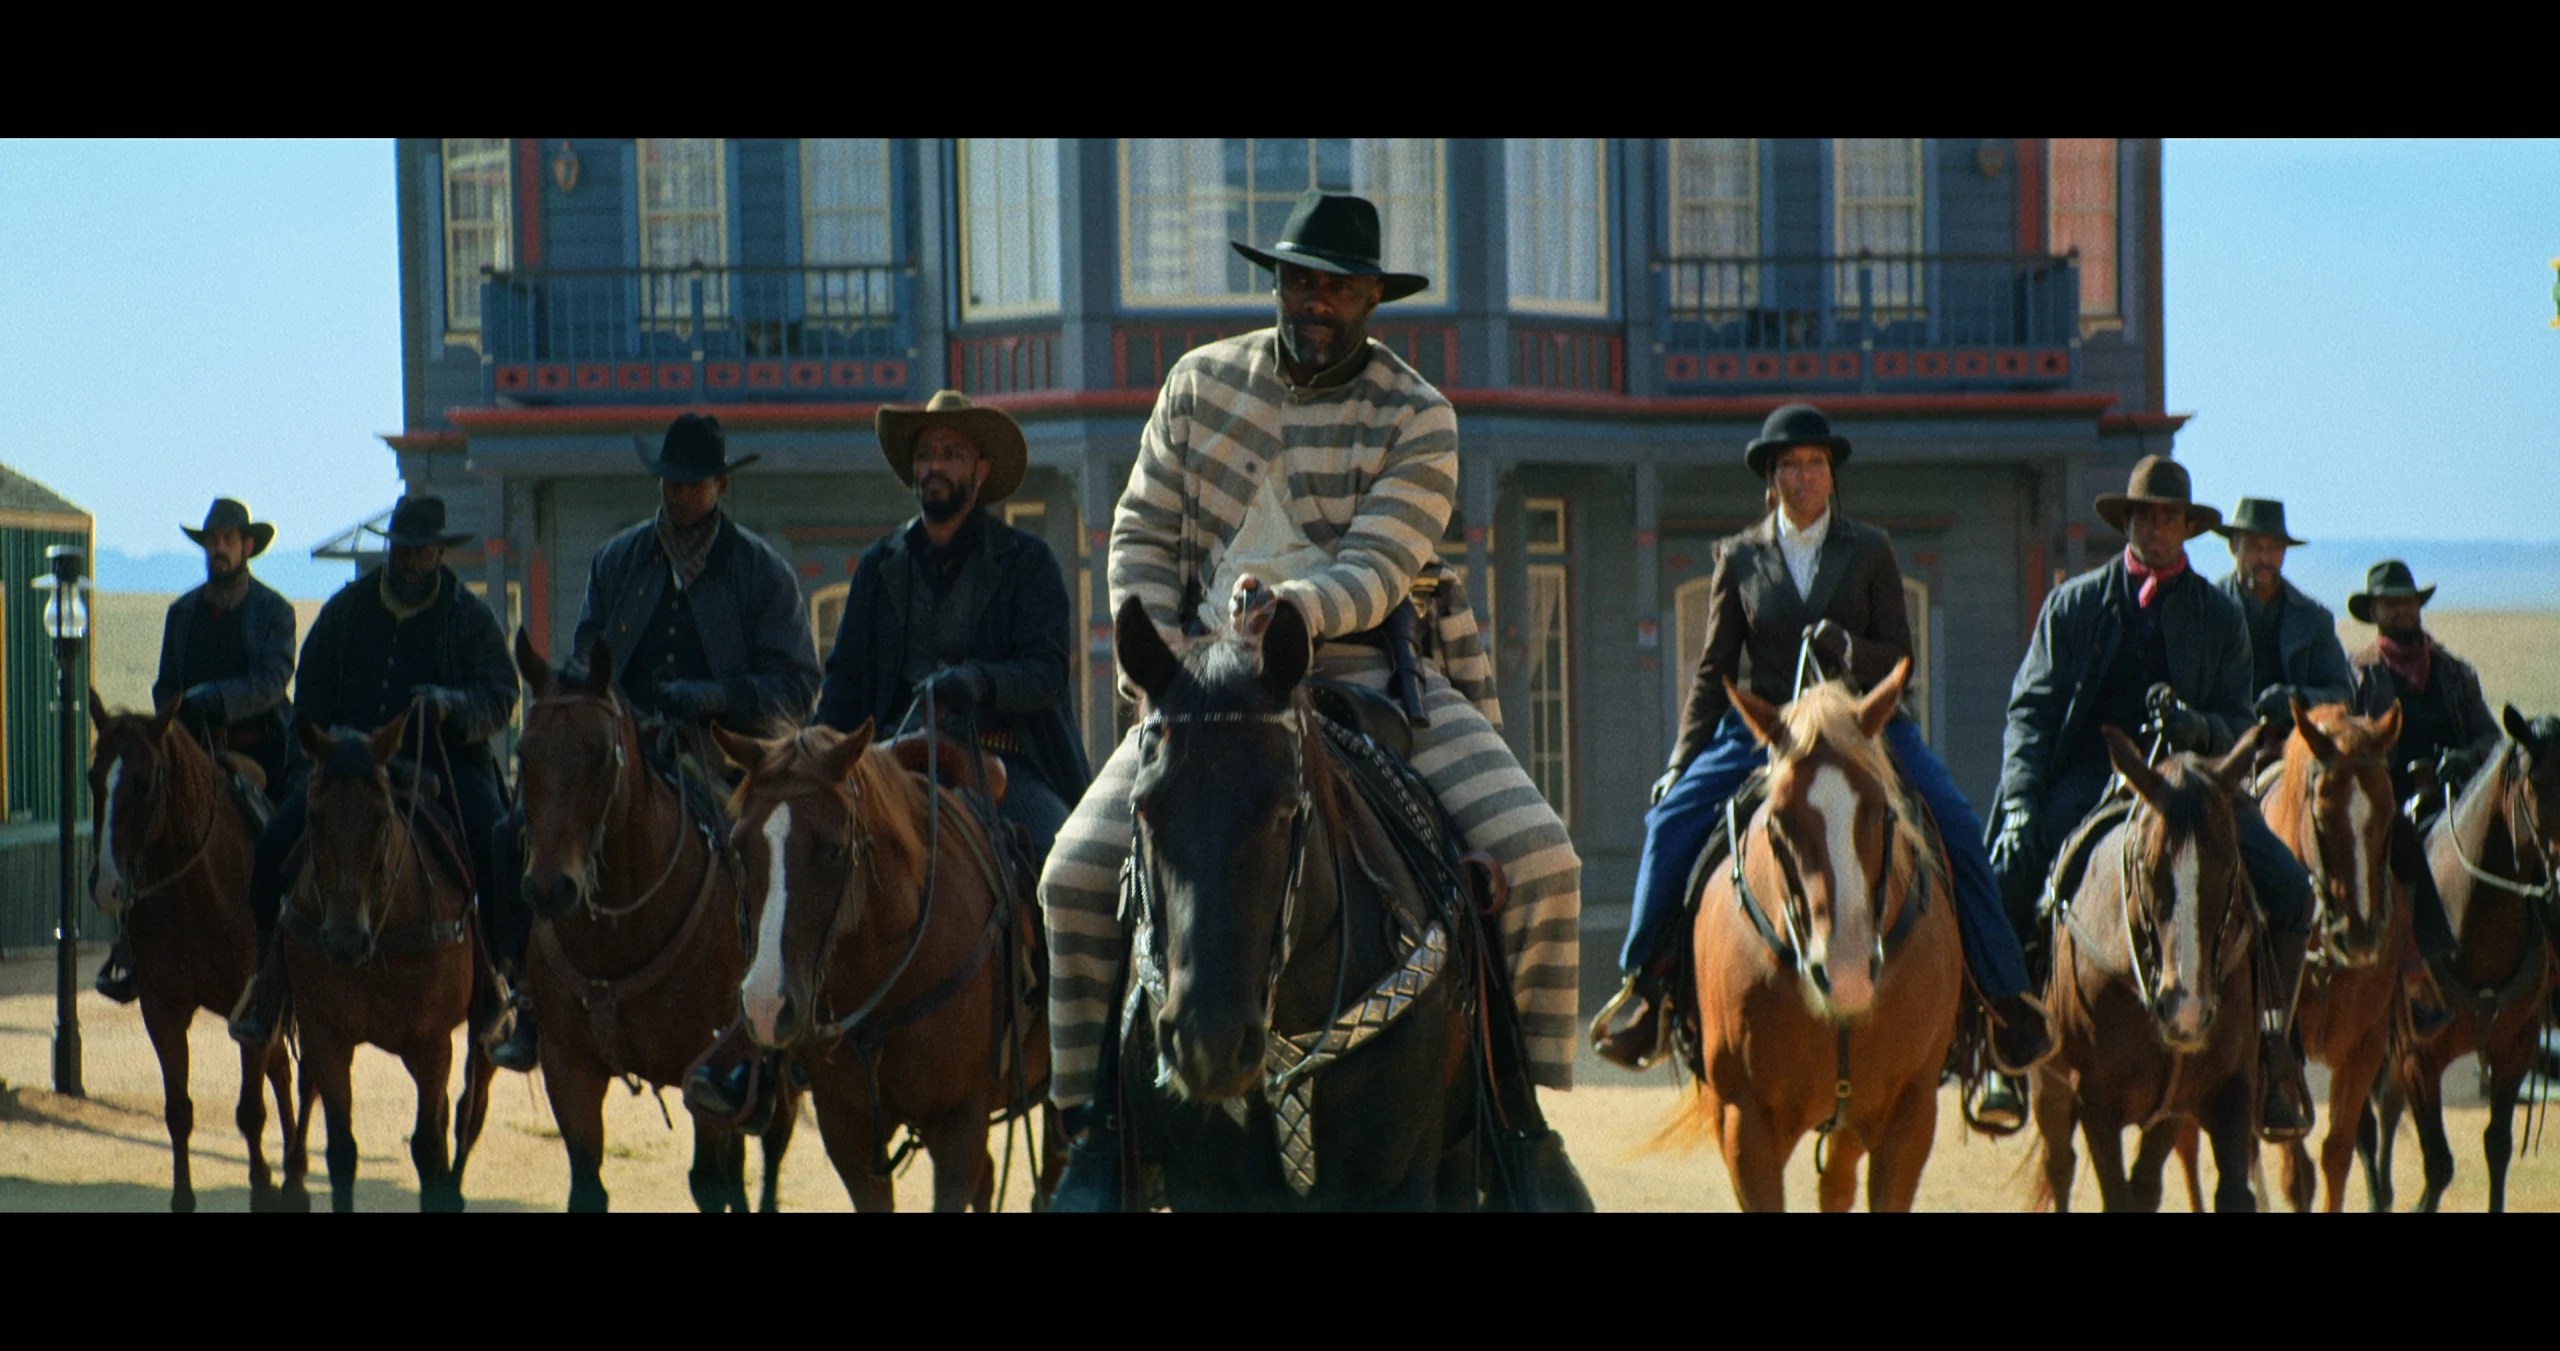 THE HARDER THEY FALL (L to R) (4th from Left) DELROY LINDO as BASS REEVES, IDRIS ELBA as RUFUS BUCK, and REGINA KING as TRUDY S